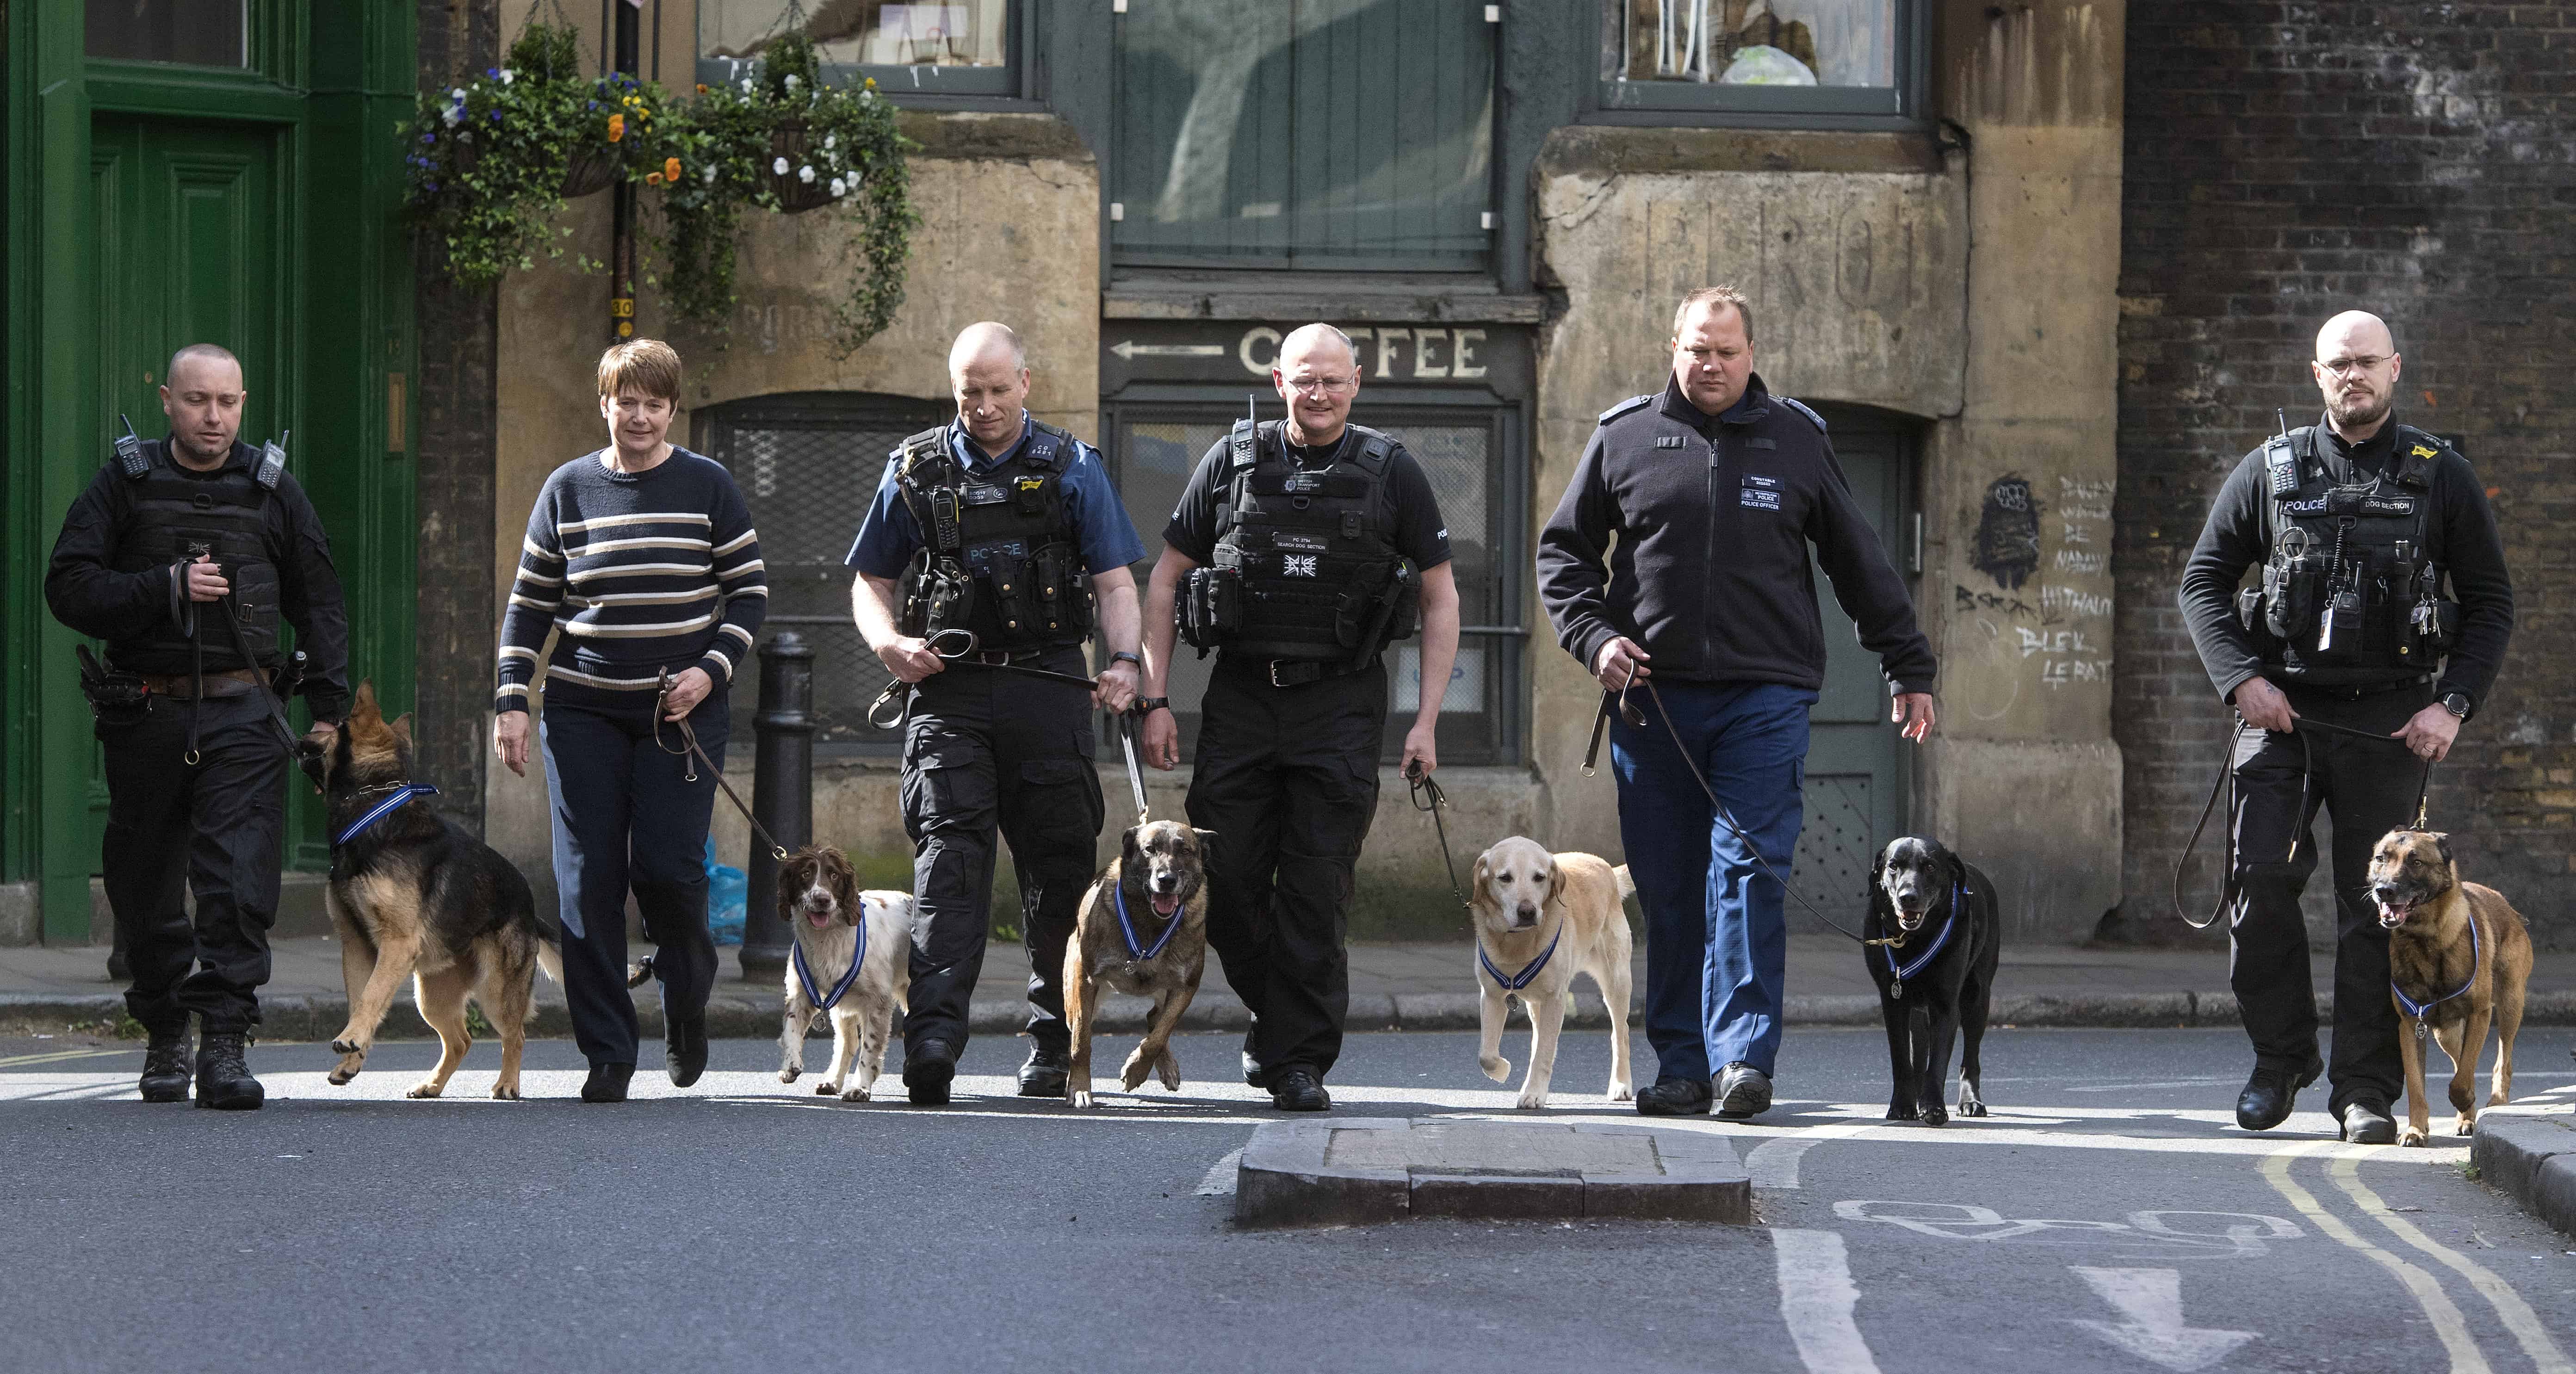 Six of the hero police dogs who will be given an award for their bravery
Picture by Ben Stevens